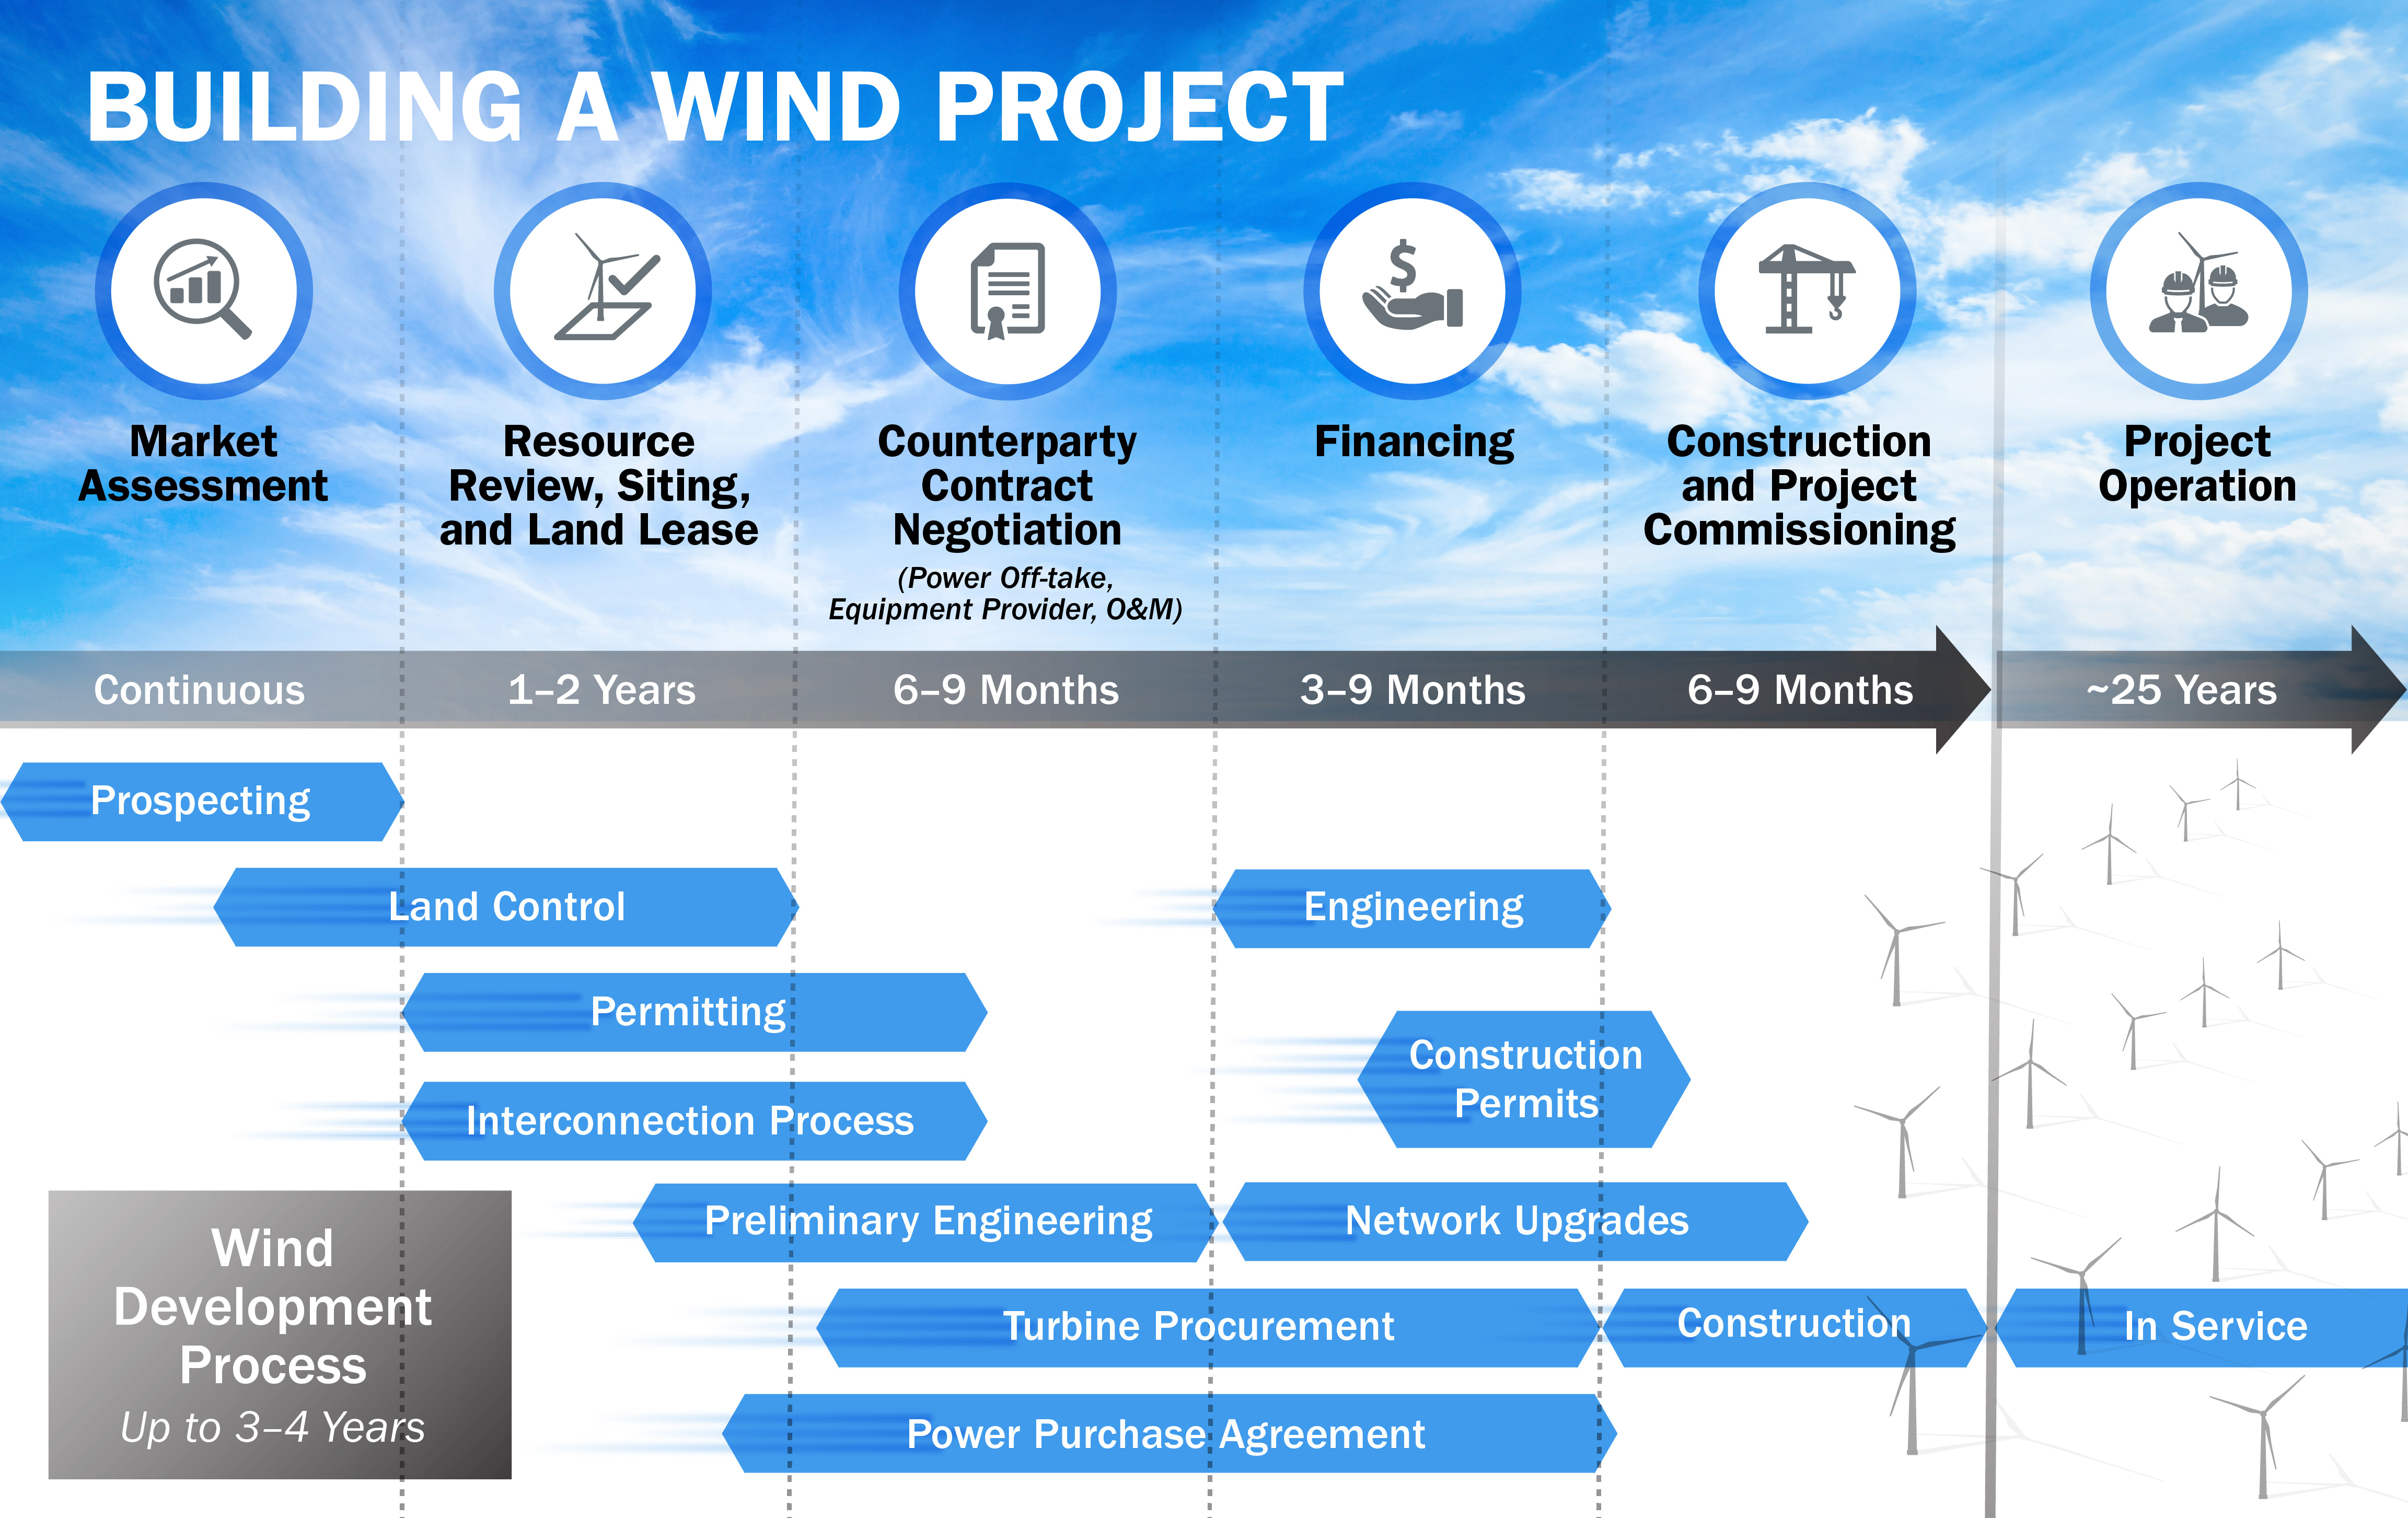 3- to 4-year Wind Development Process timeline for building a wind project